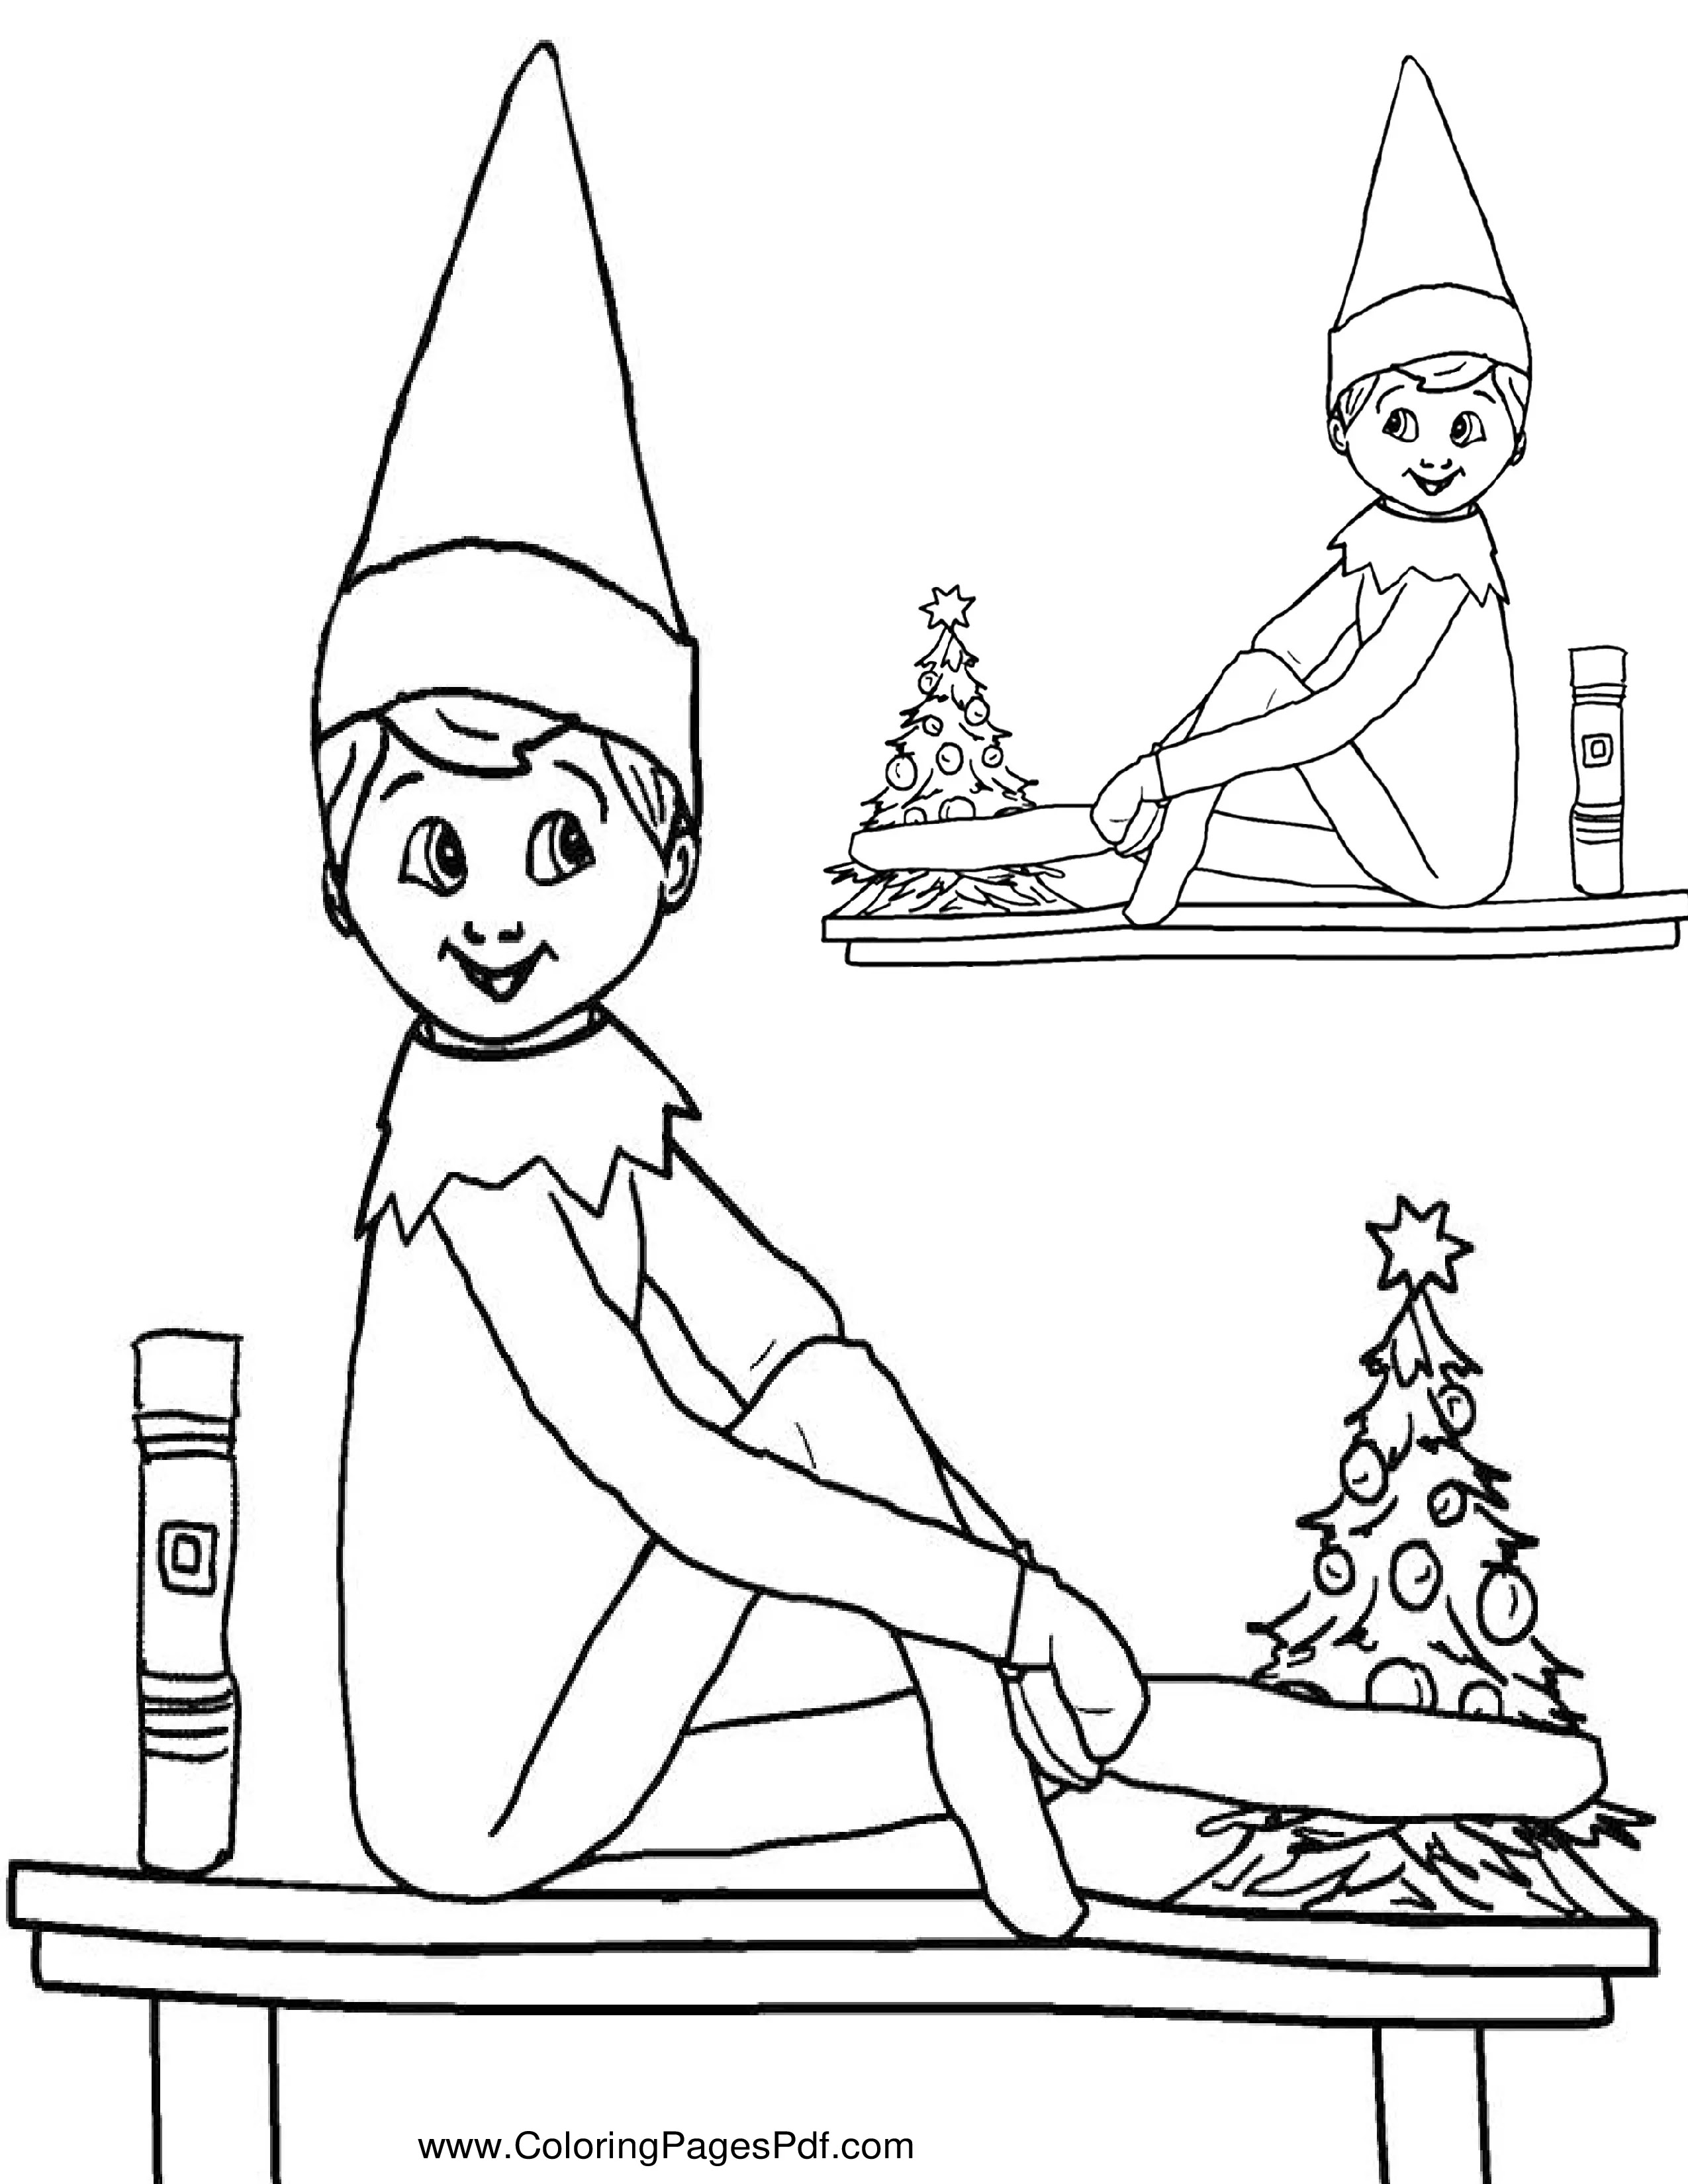 Elf on the shelf pictures to print